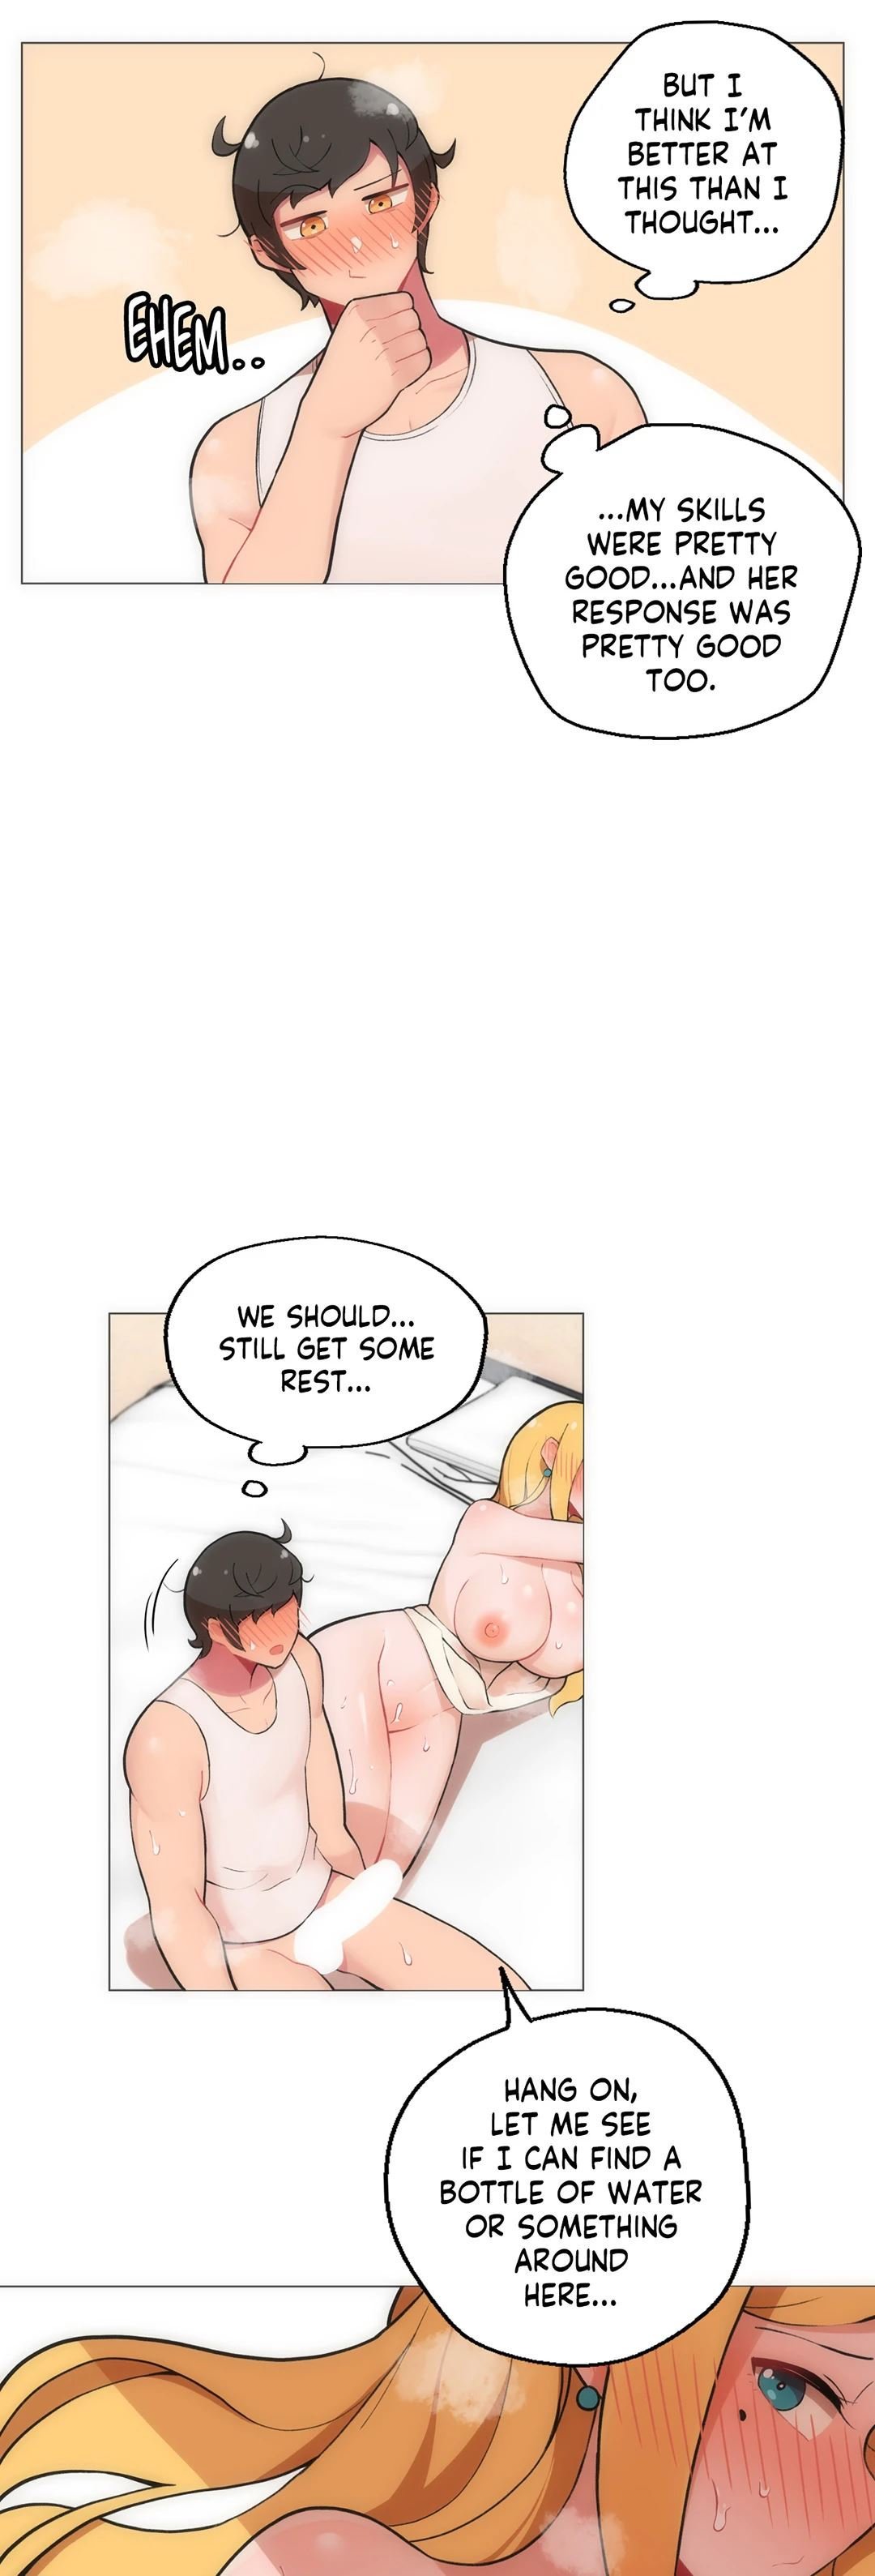 sexcape-room-good-game-chap-3-36